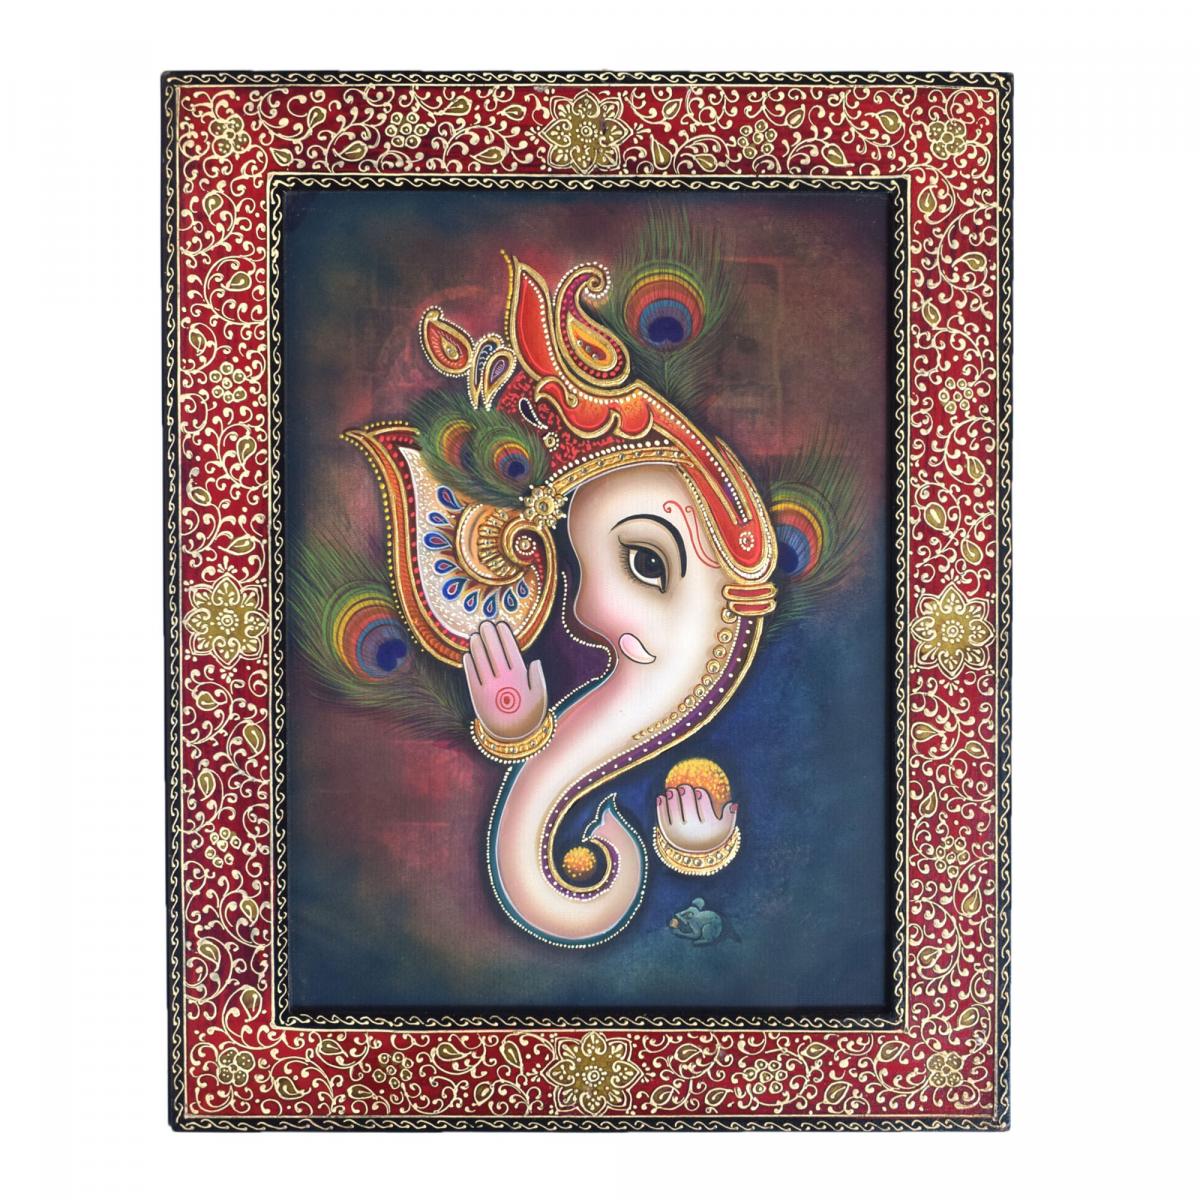 GANESHA FACE PAINTING WITH WALL HANGING